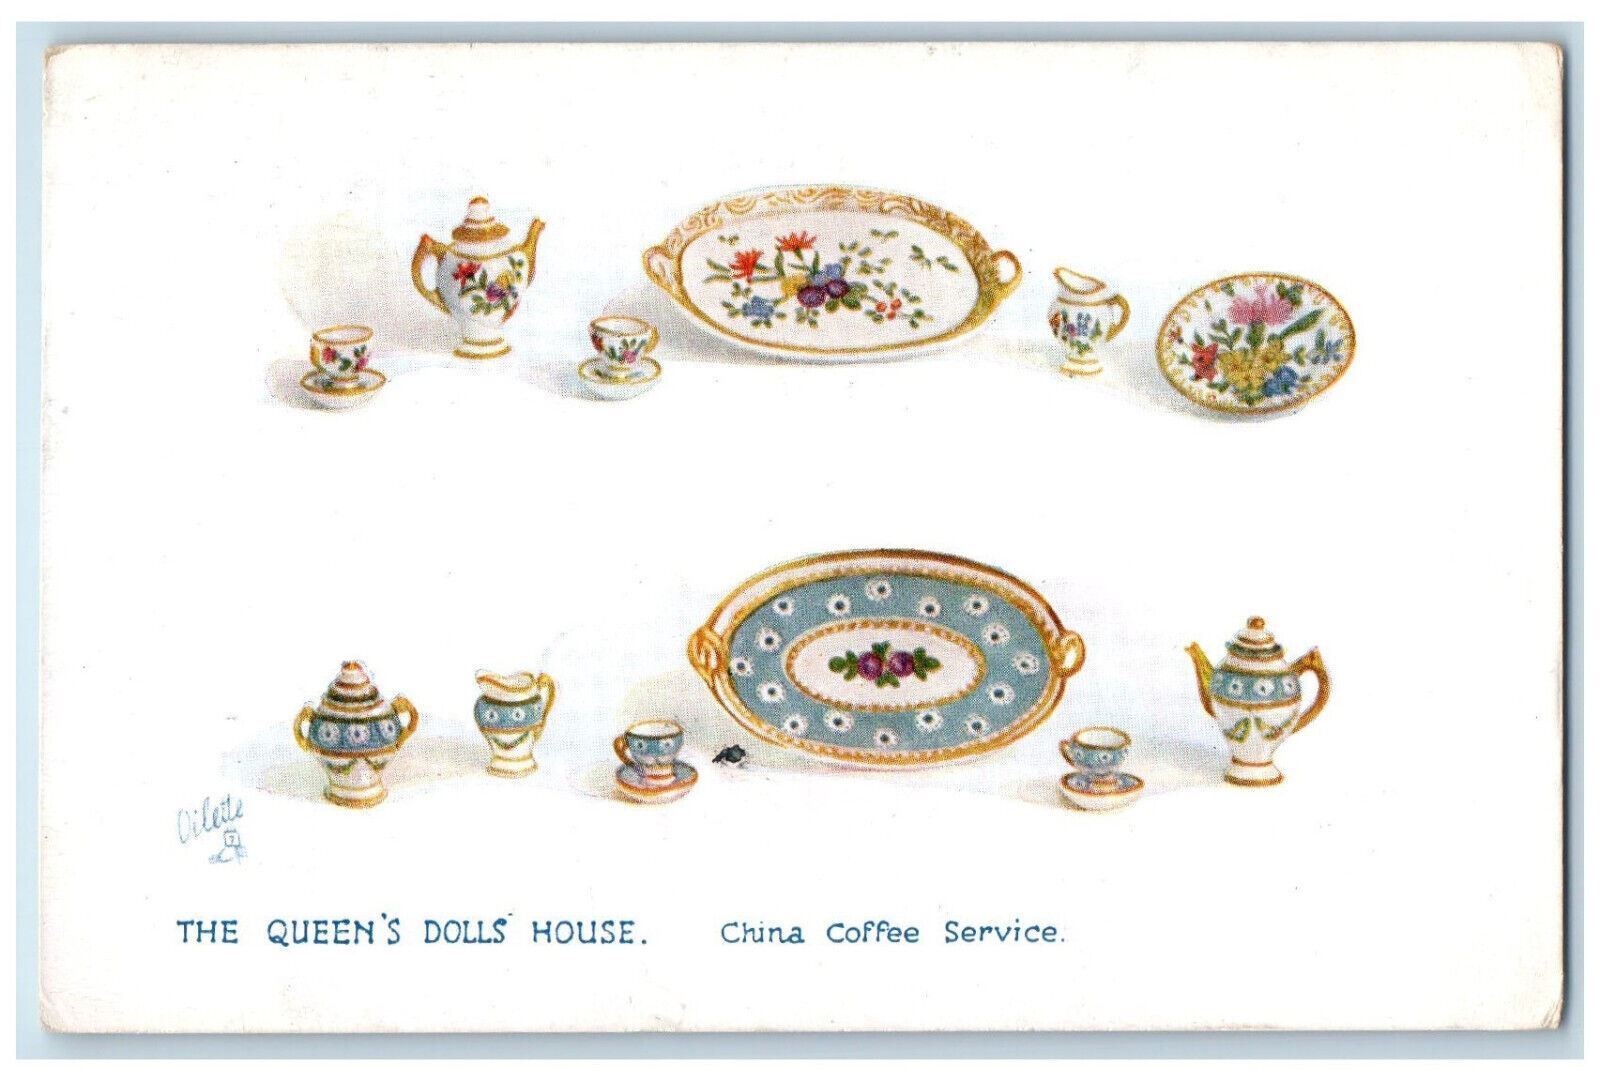 1924 The Queen's Dolls House China Coffee Service Oilette Tuck Art Postcard